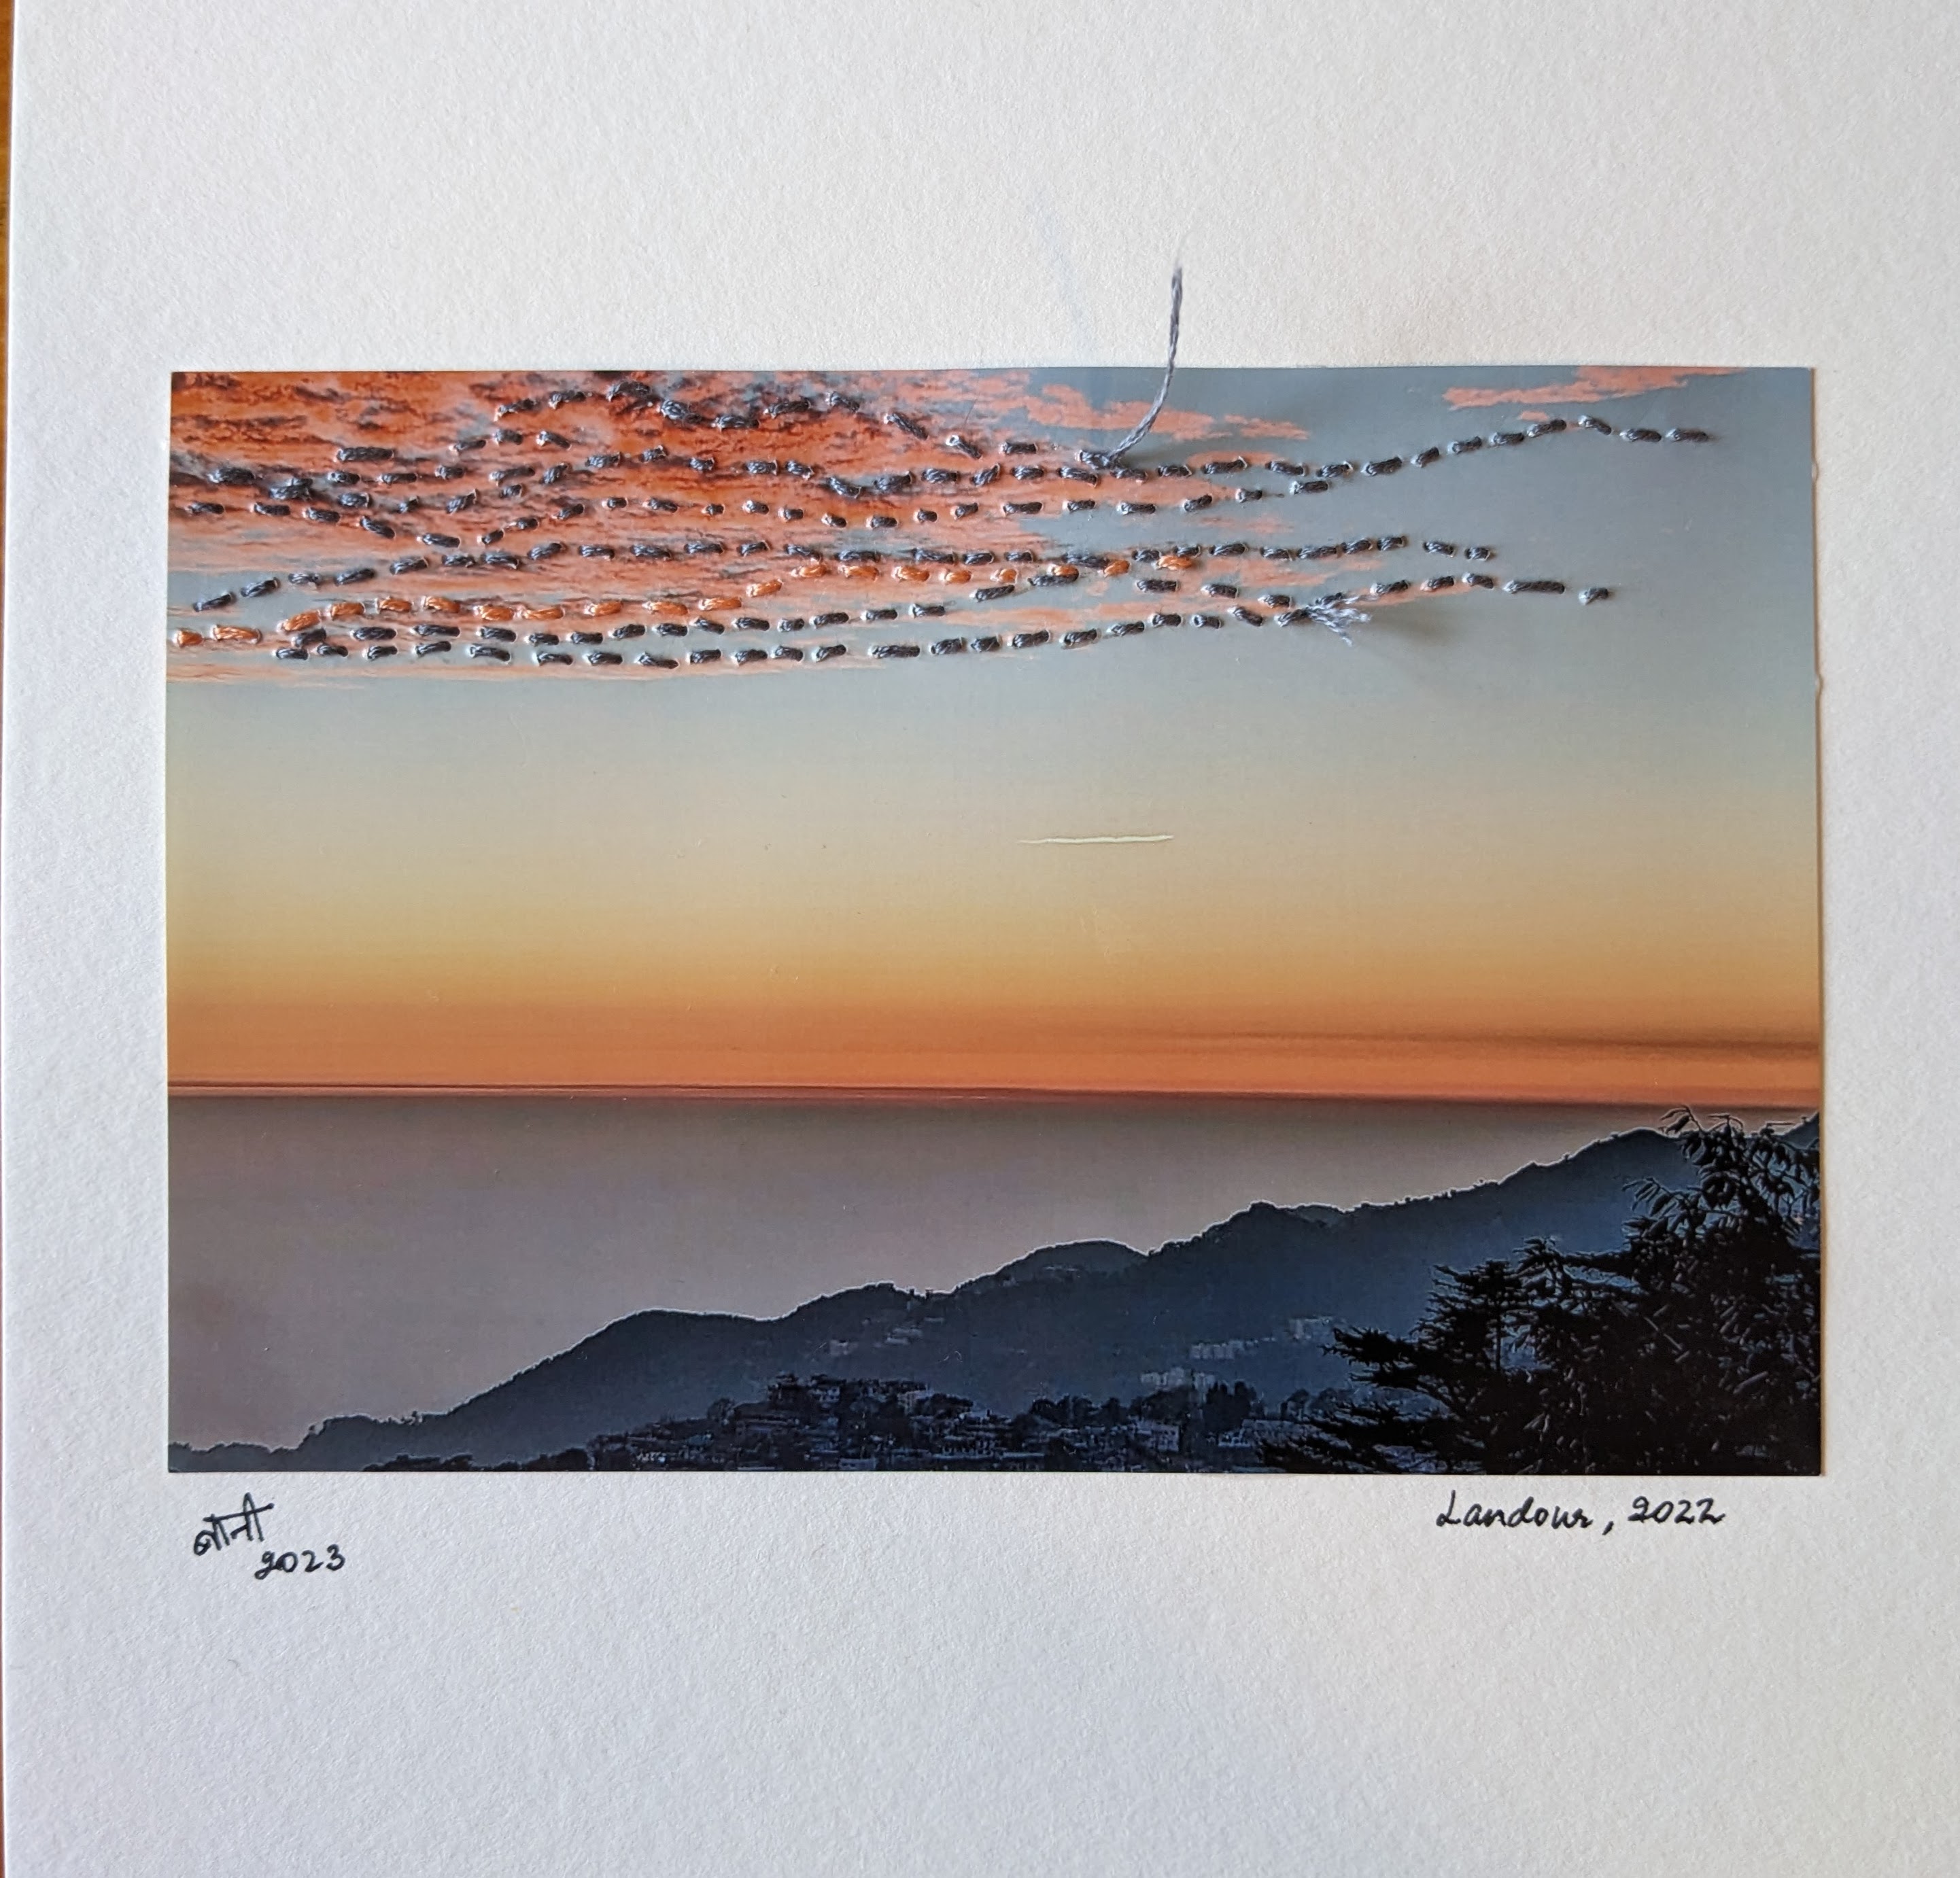 Photo embroidery on a sky photo using threads